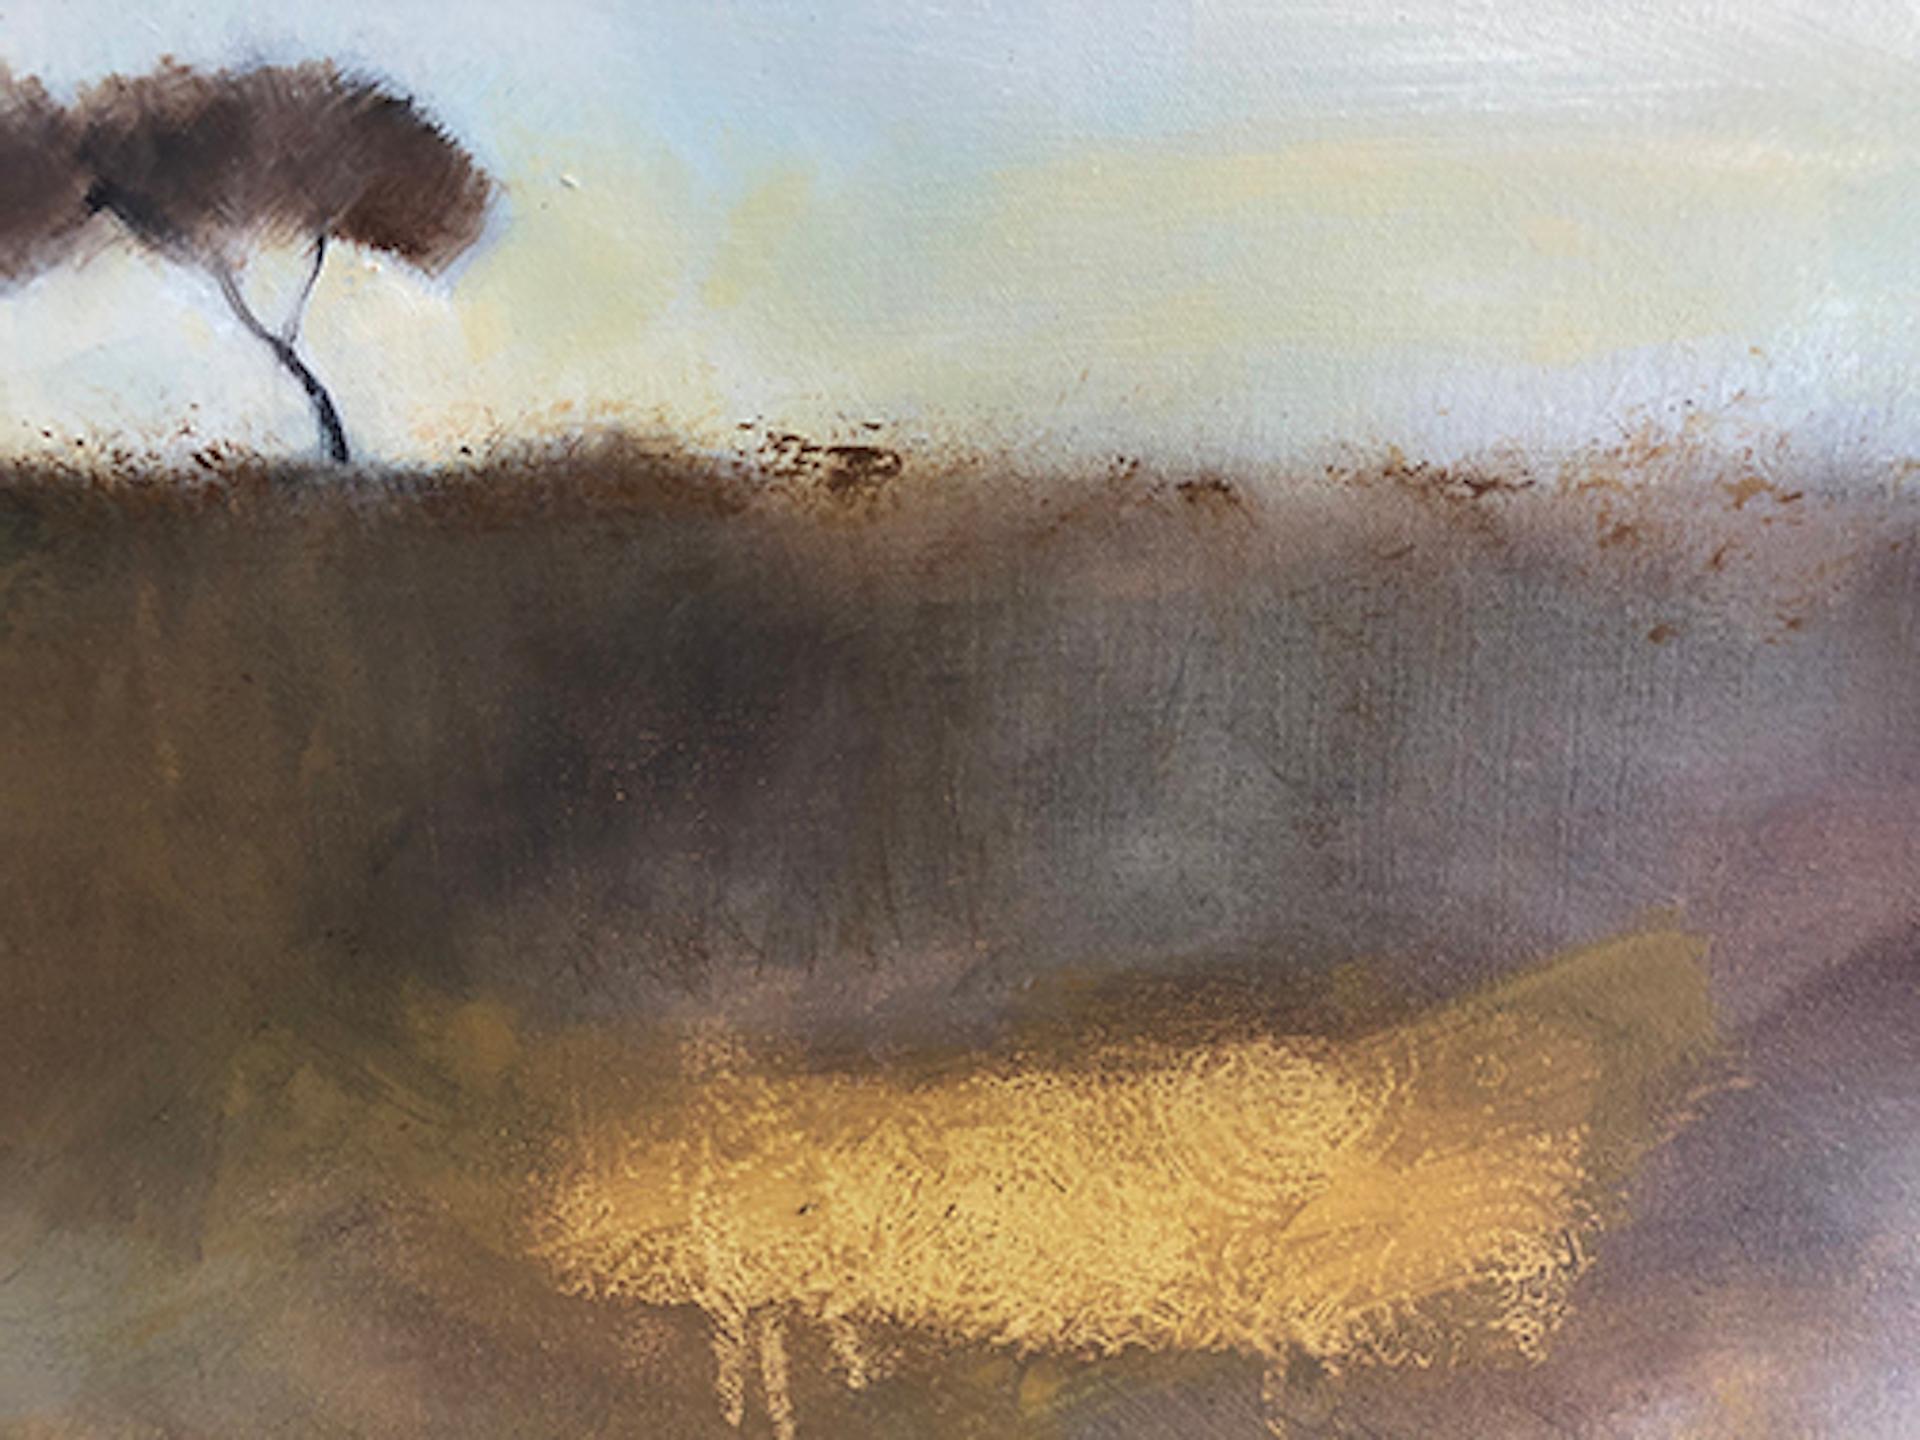 Heartland By Ana Bianchi [2020]

original
Oil on Canvas
Image size: H:8.138 cm x W:11 cm
Complete Size of Unframed Work: H:76 cm x W:102 cm x D:3cm
Framed Size: H:80 cm x W:106 cm x D:5cm
Sold Framed
Please note that insitu images are purely an